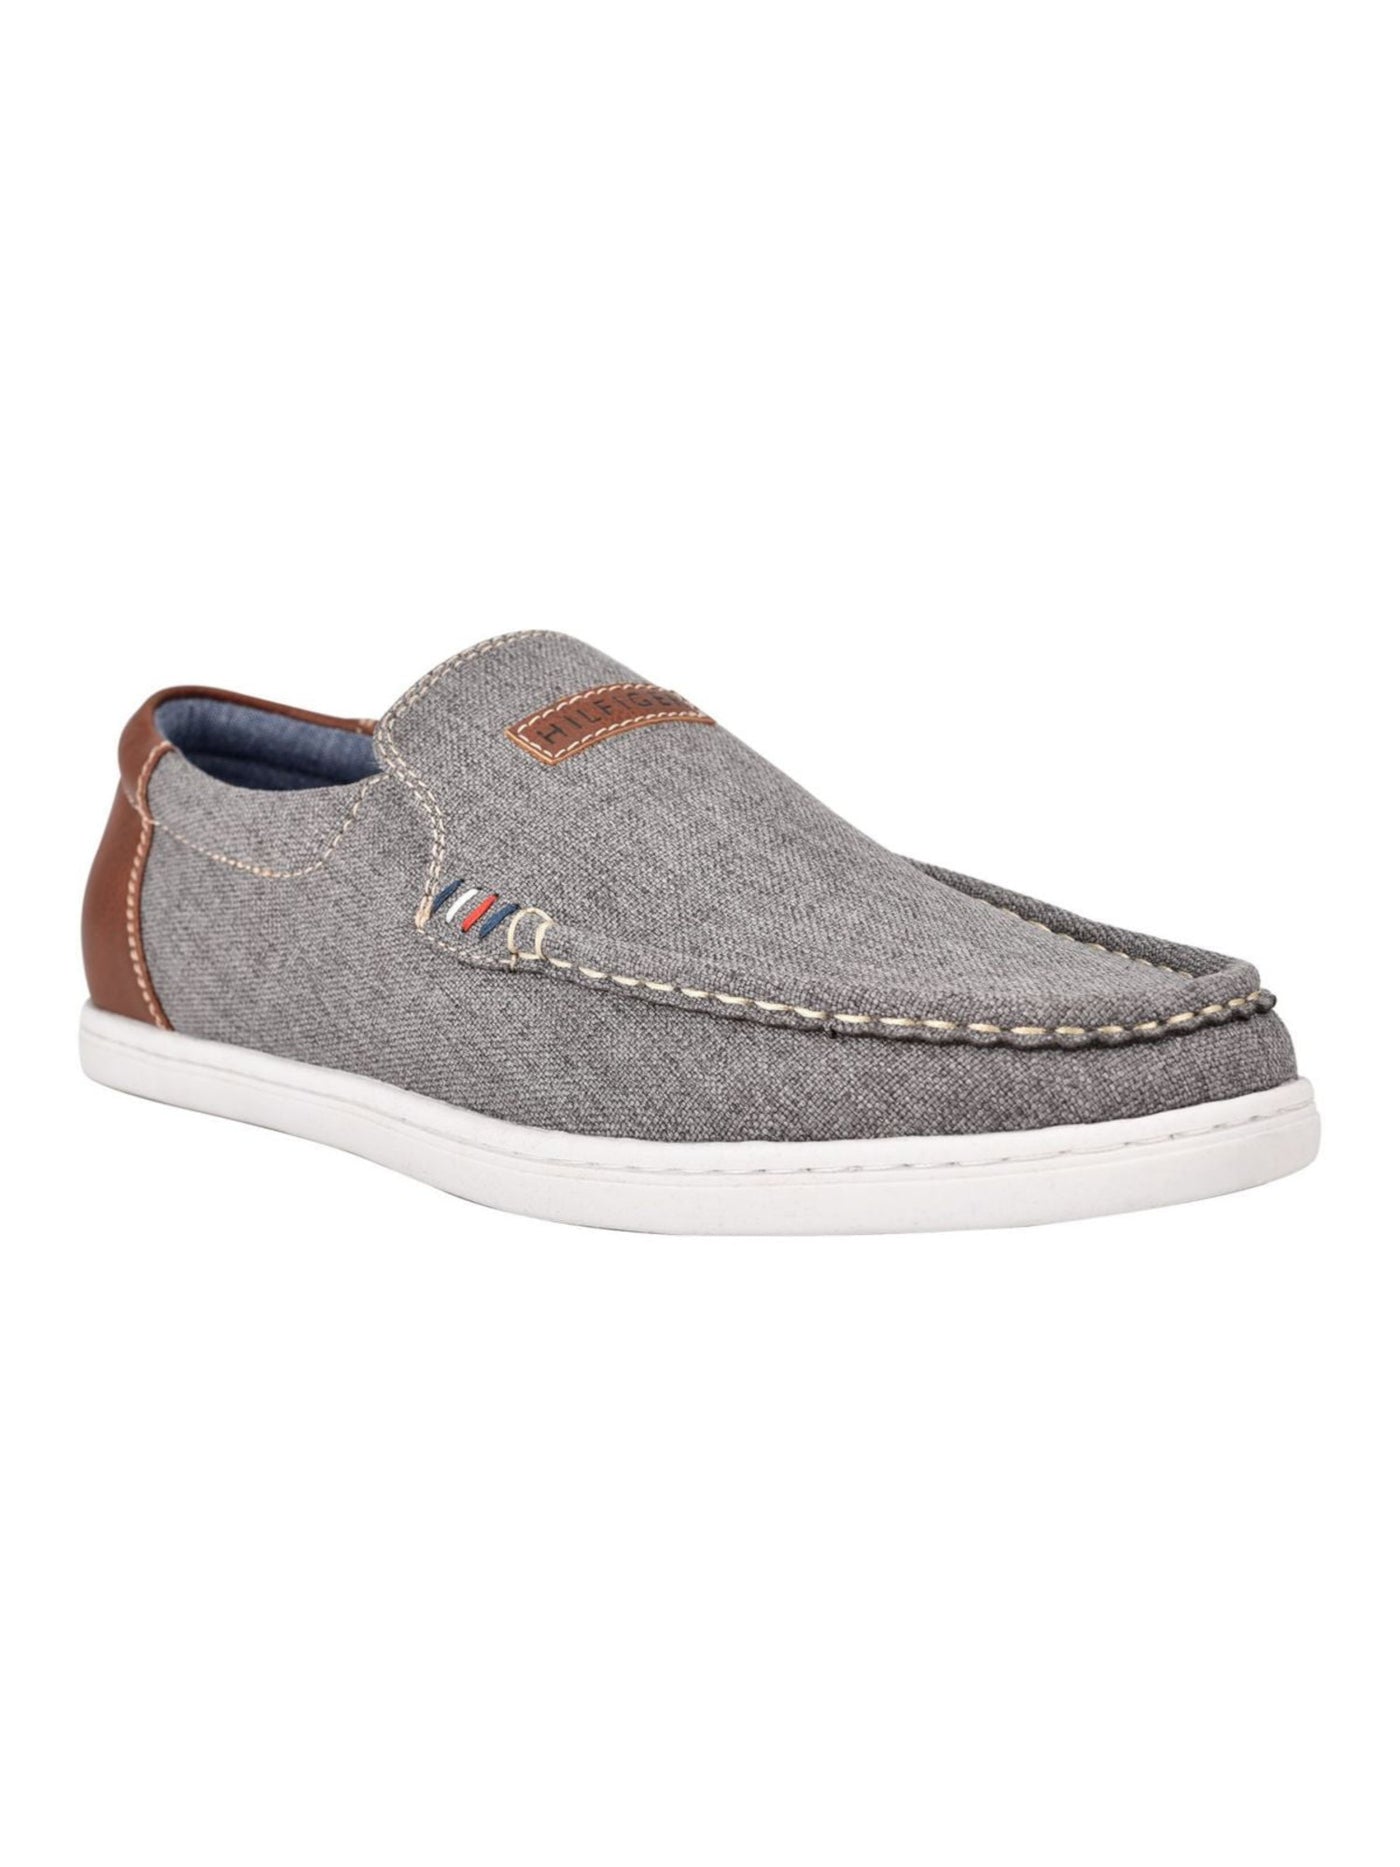 TOMMY HILFIGER Mens Gray Linen Cushioned Stretch Carlid Round Toe Slip On Sneakers Shoes 11.5